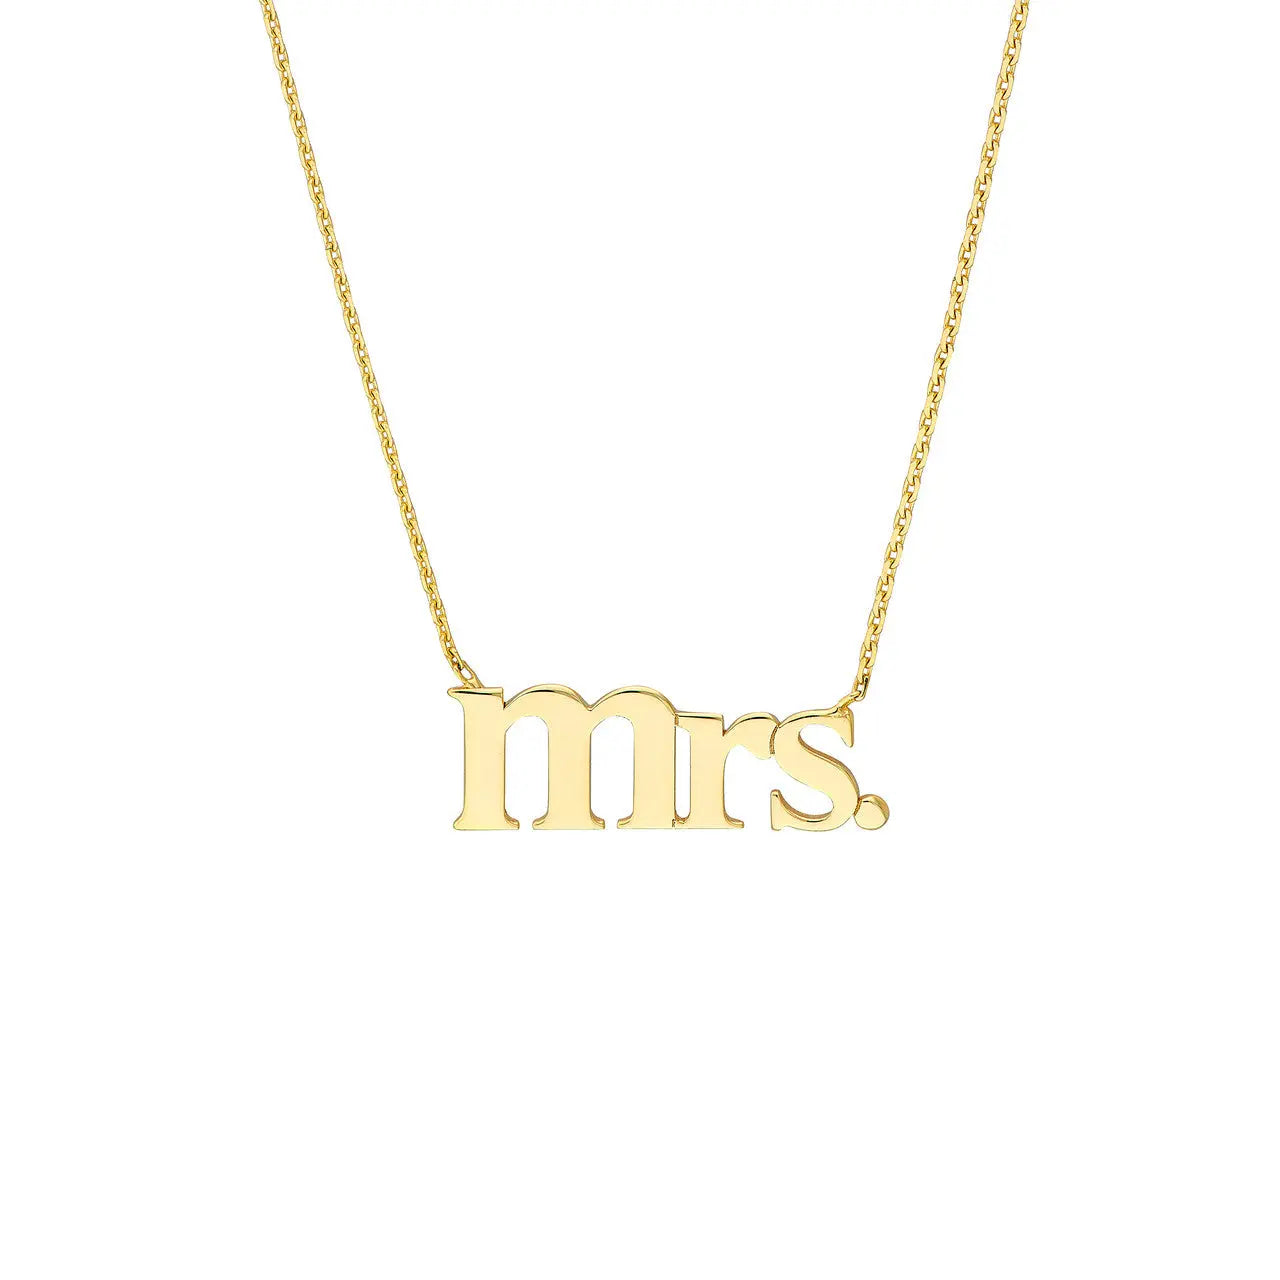 Mrs. Necklace